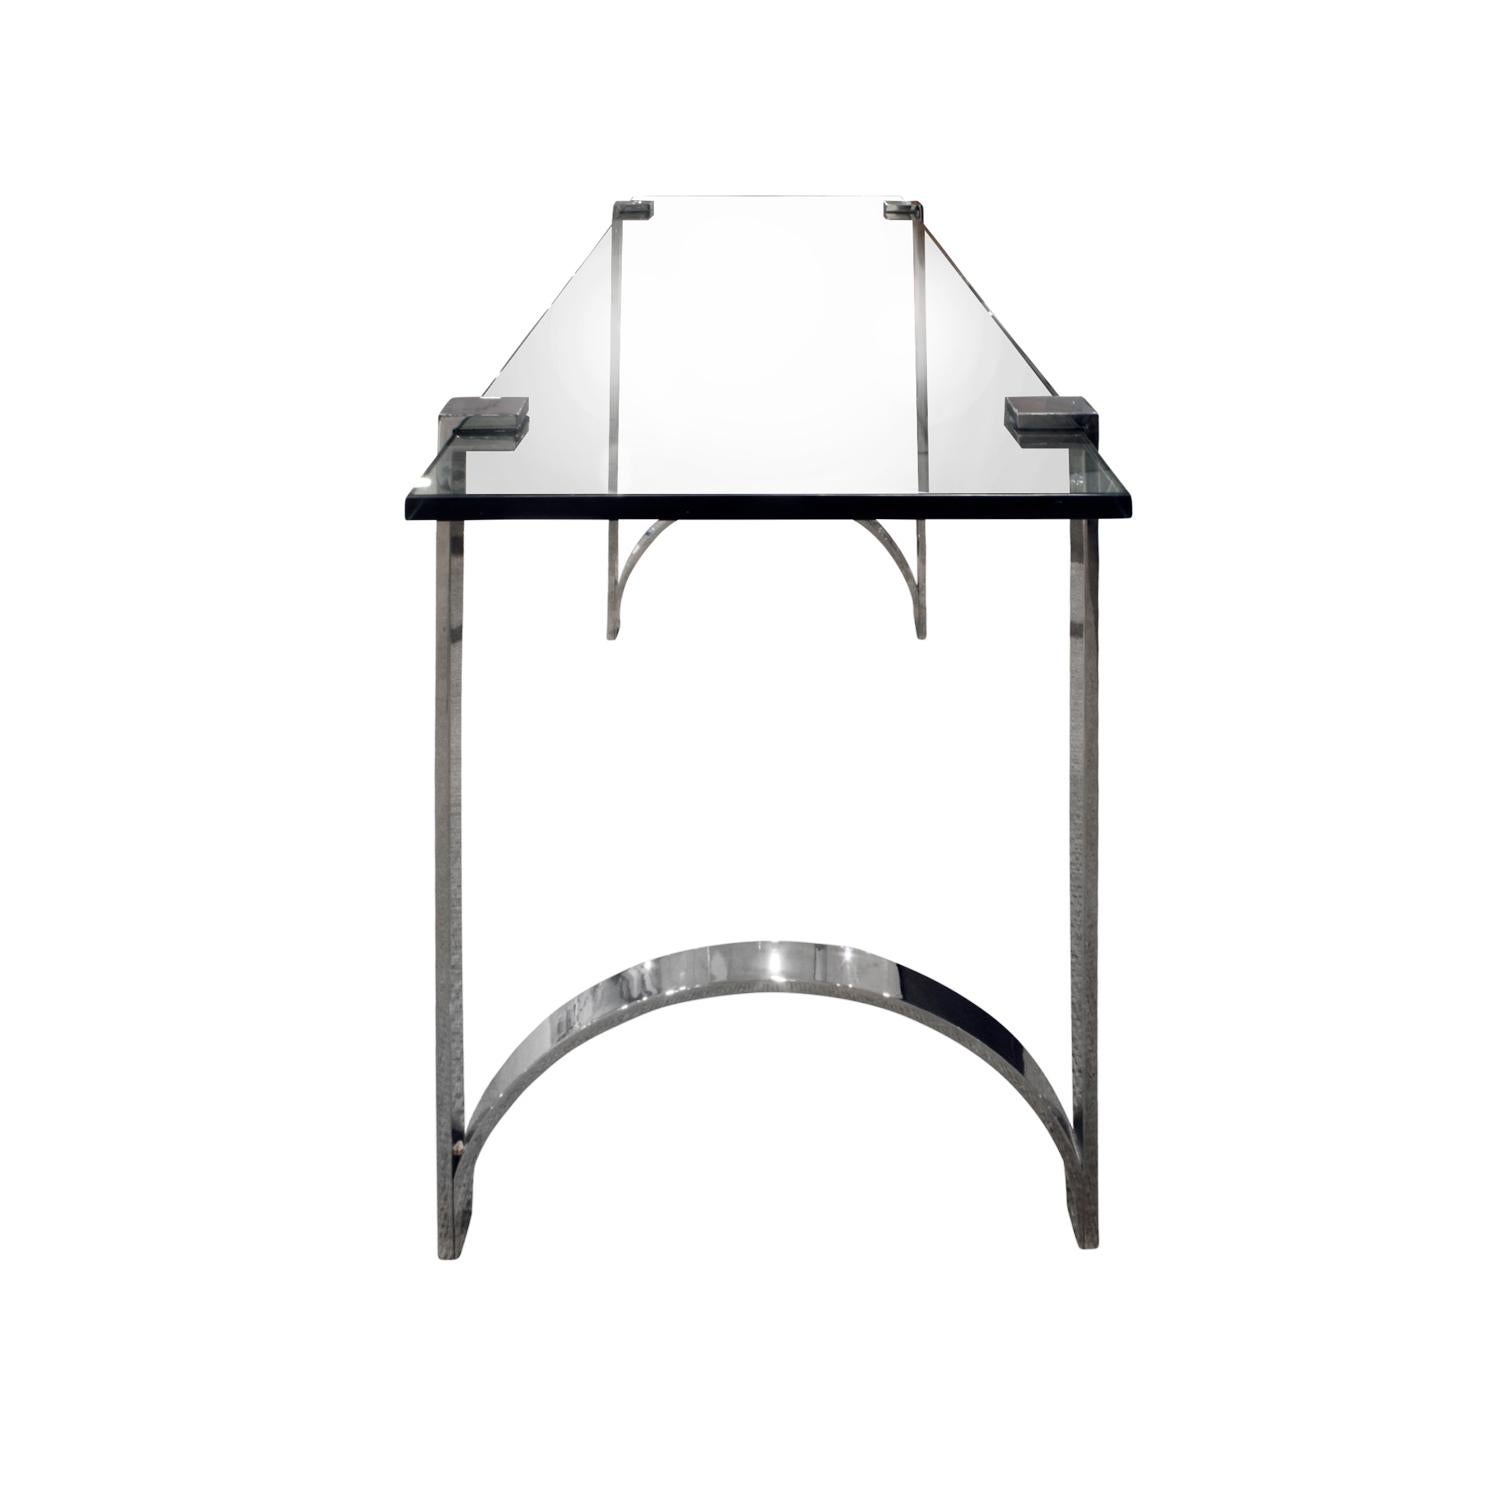 Mid-Century Modern Sleek Console Table in Polished Chrome and Glass, 1970s For Sale